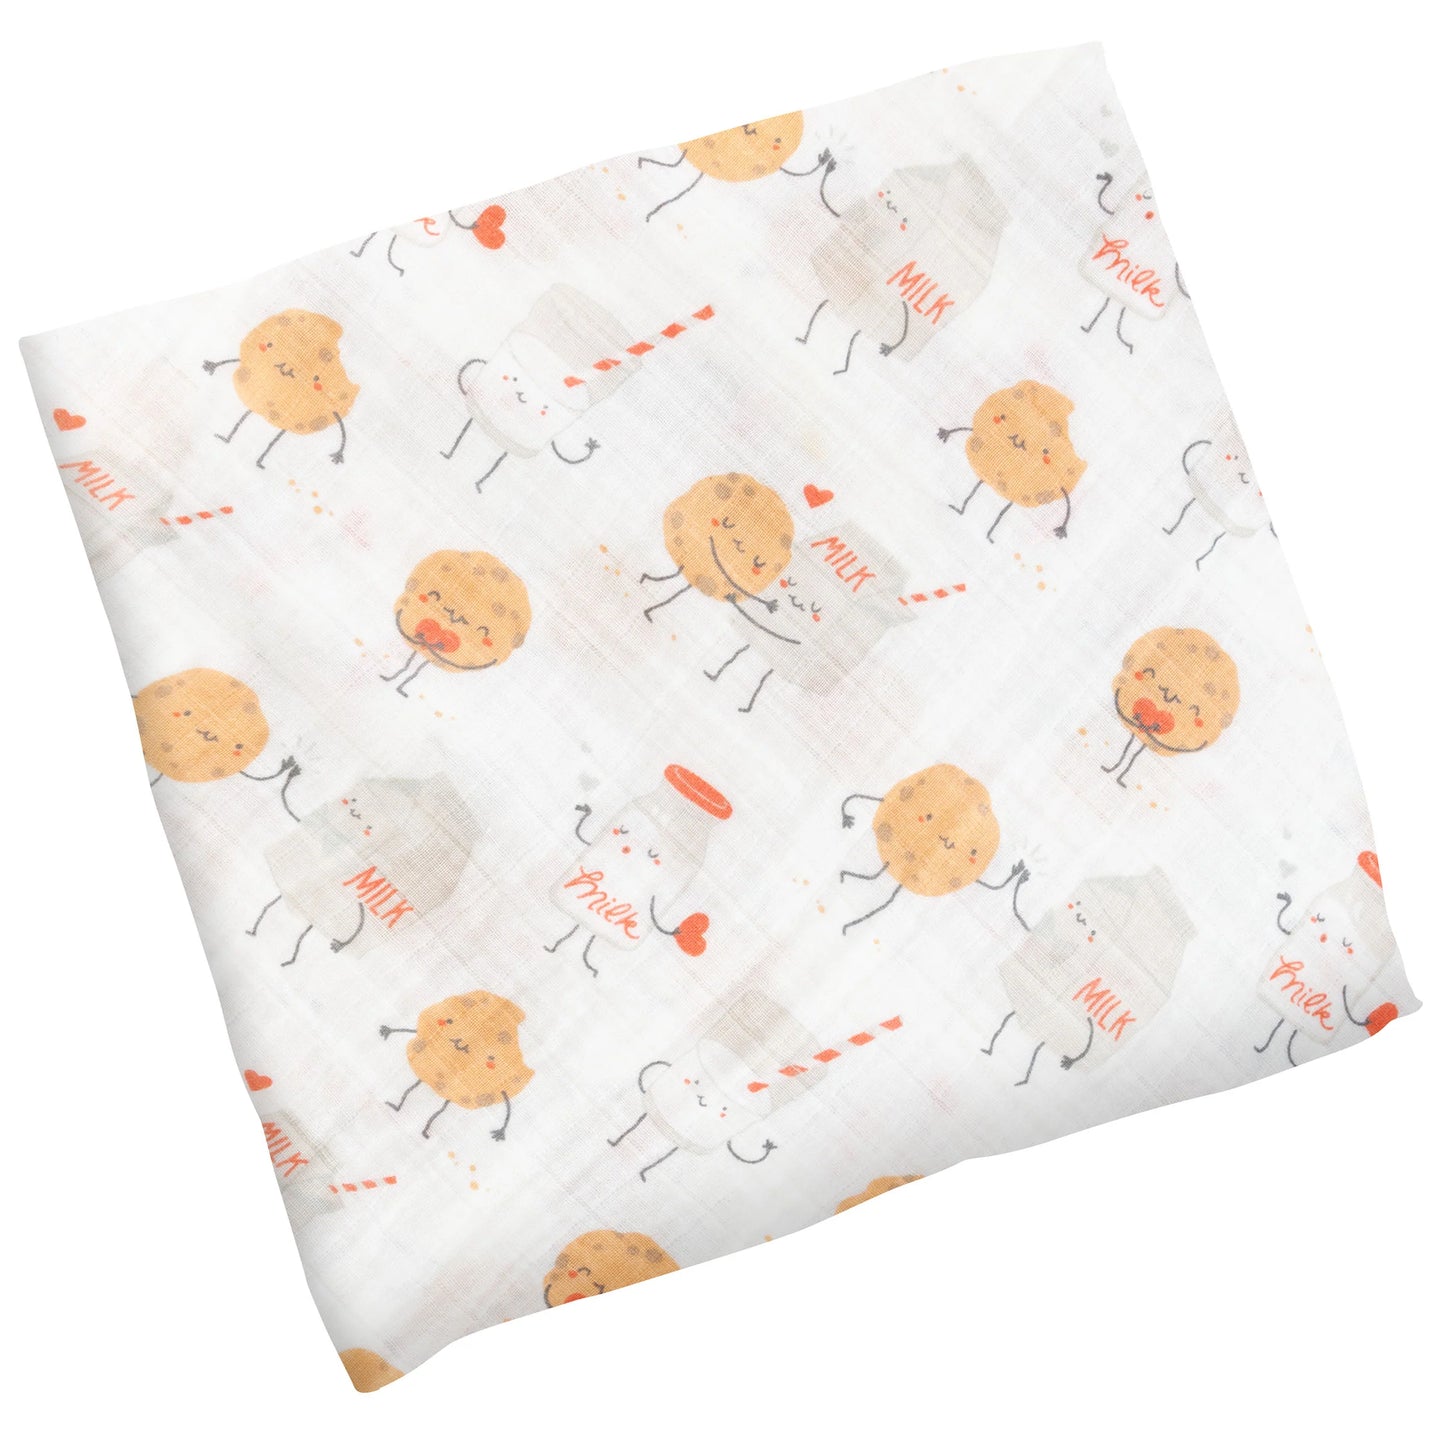 Stephen Joseph Milk and Cookies Muslin Swaddle blanket for baby